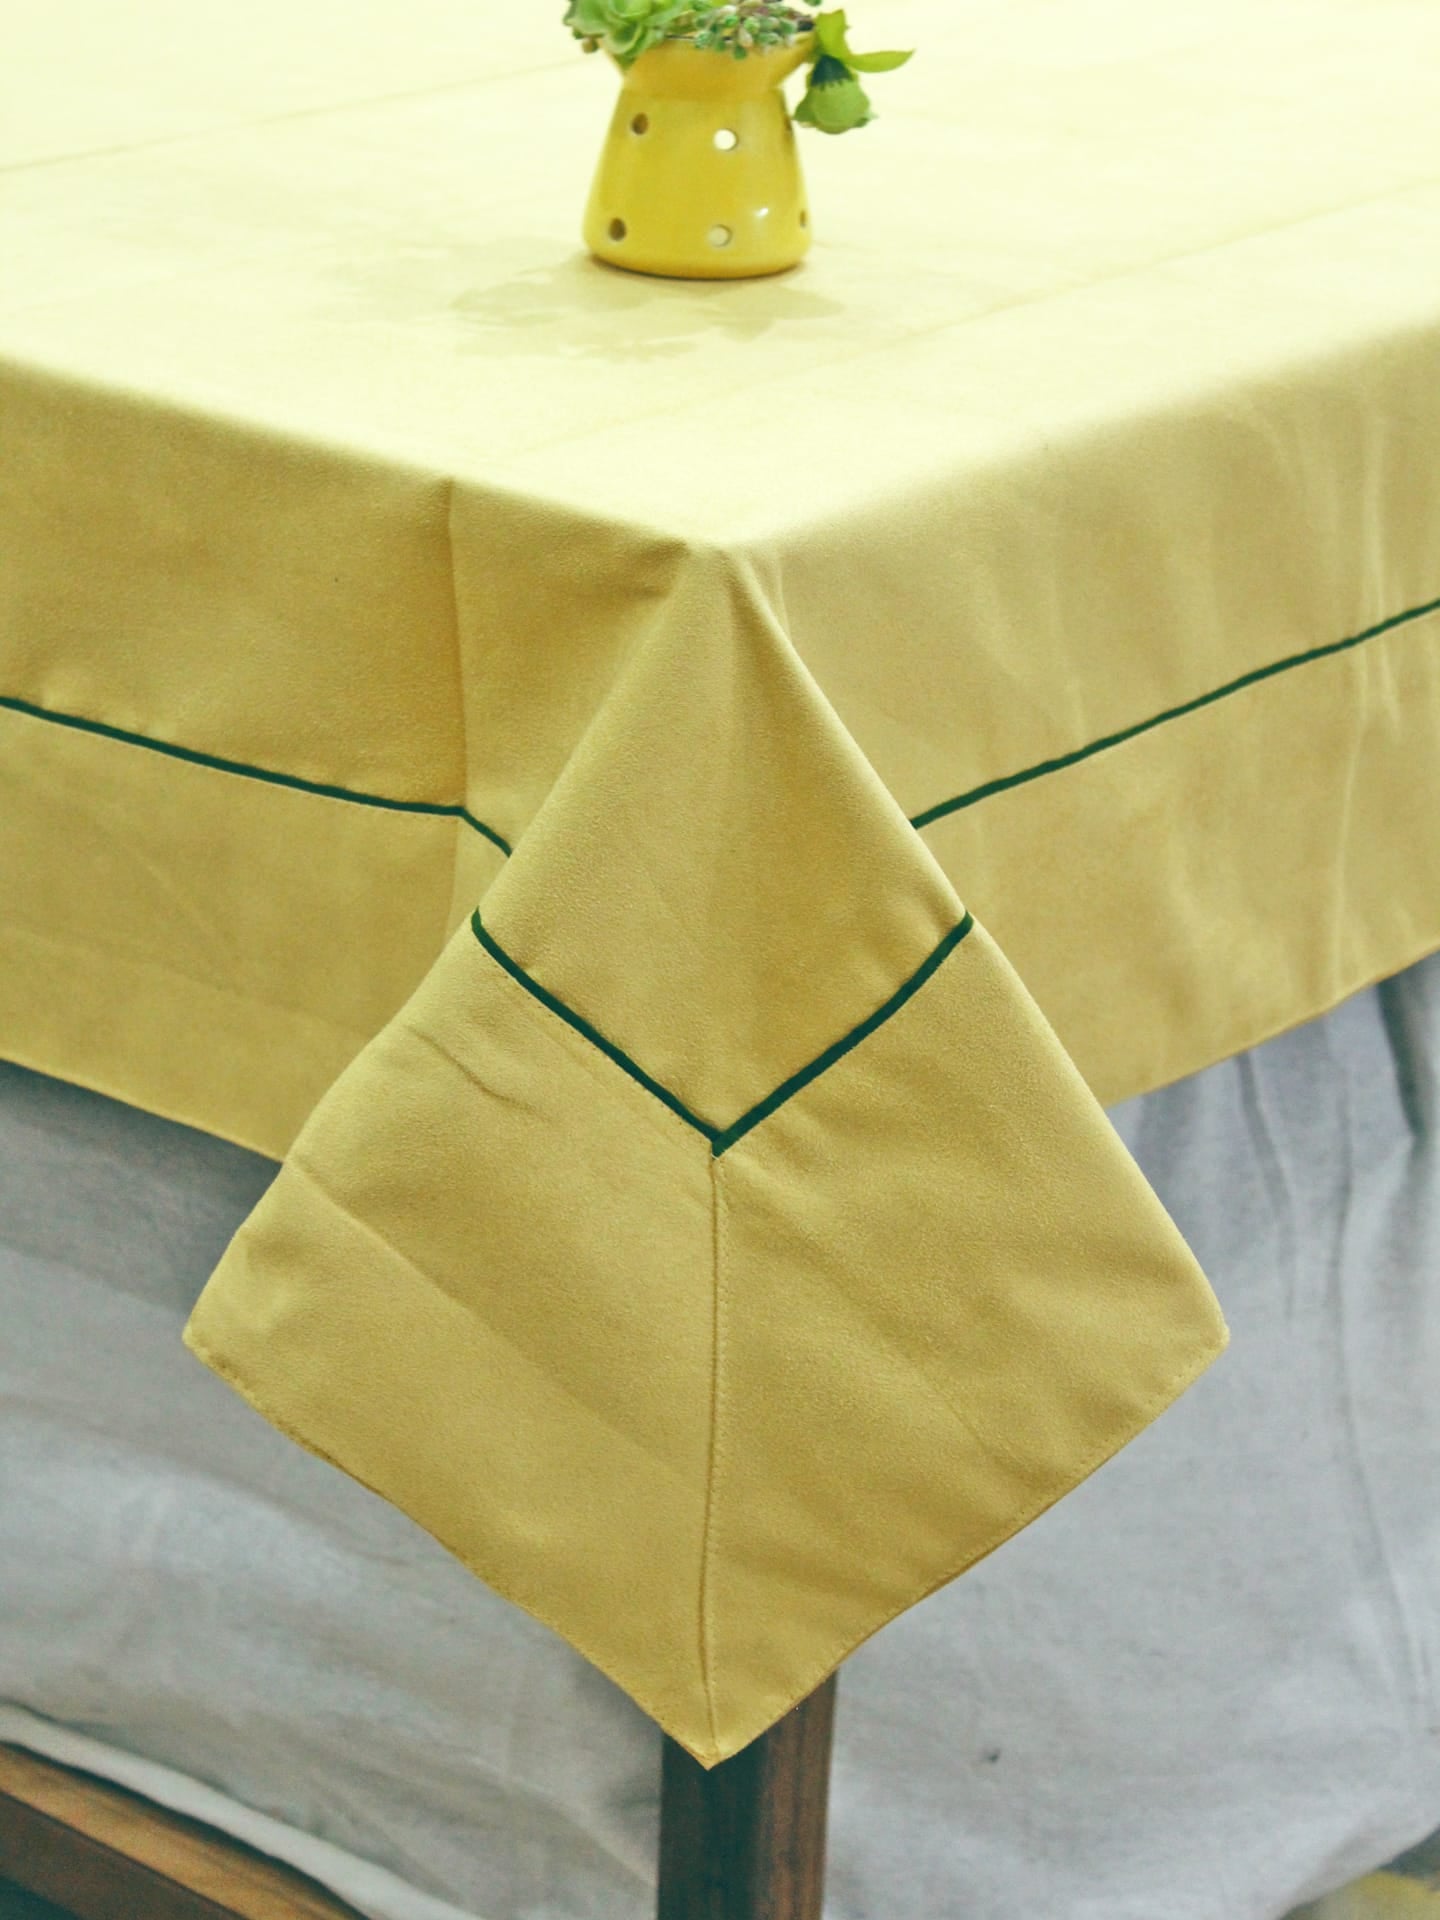 Suede Lemon Yellow Plain Microfibre Table Cloth(1 Pc) online in India at best prices 